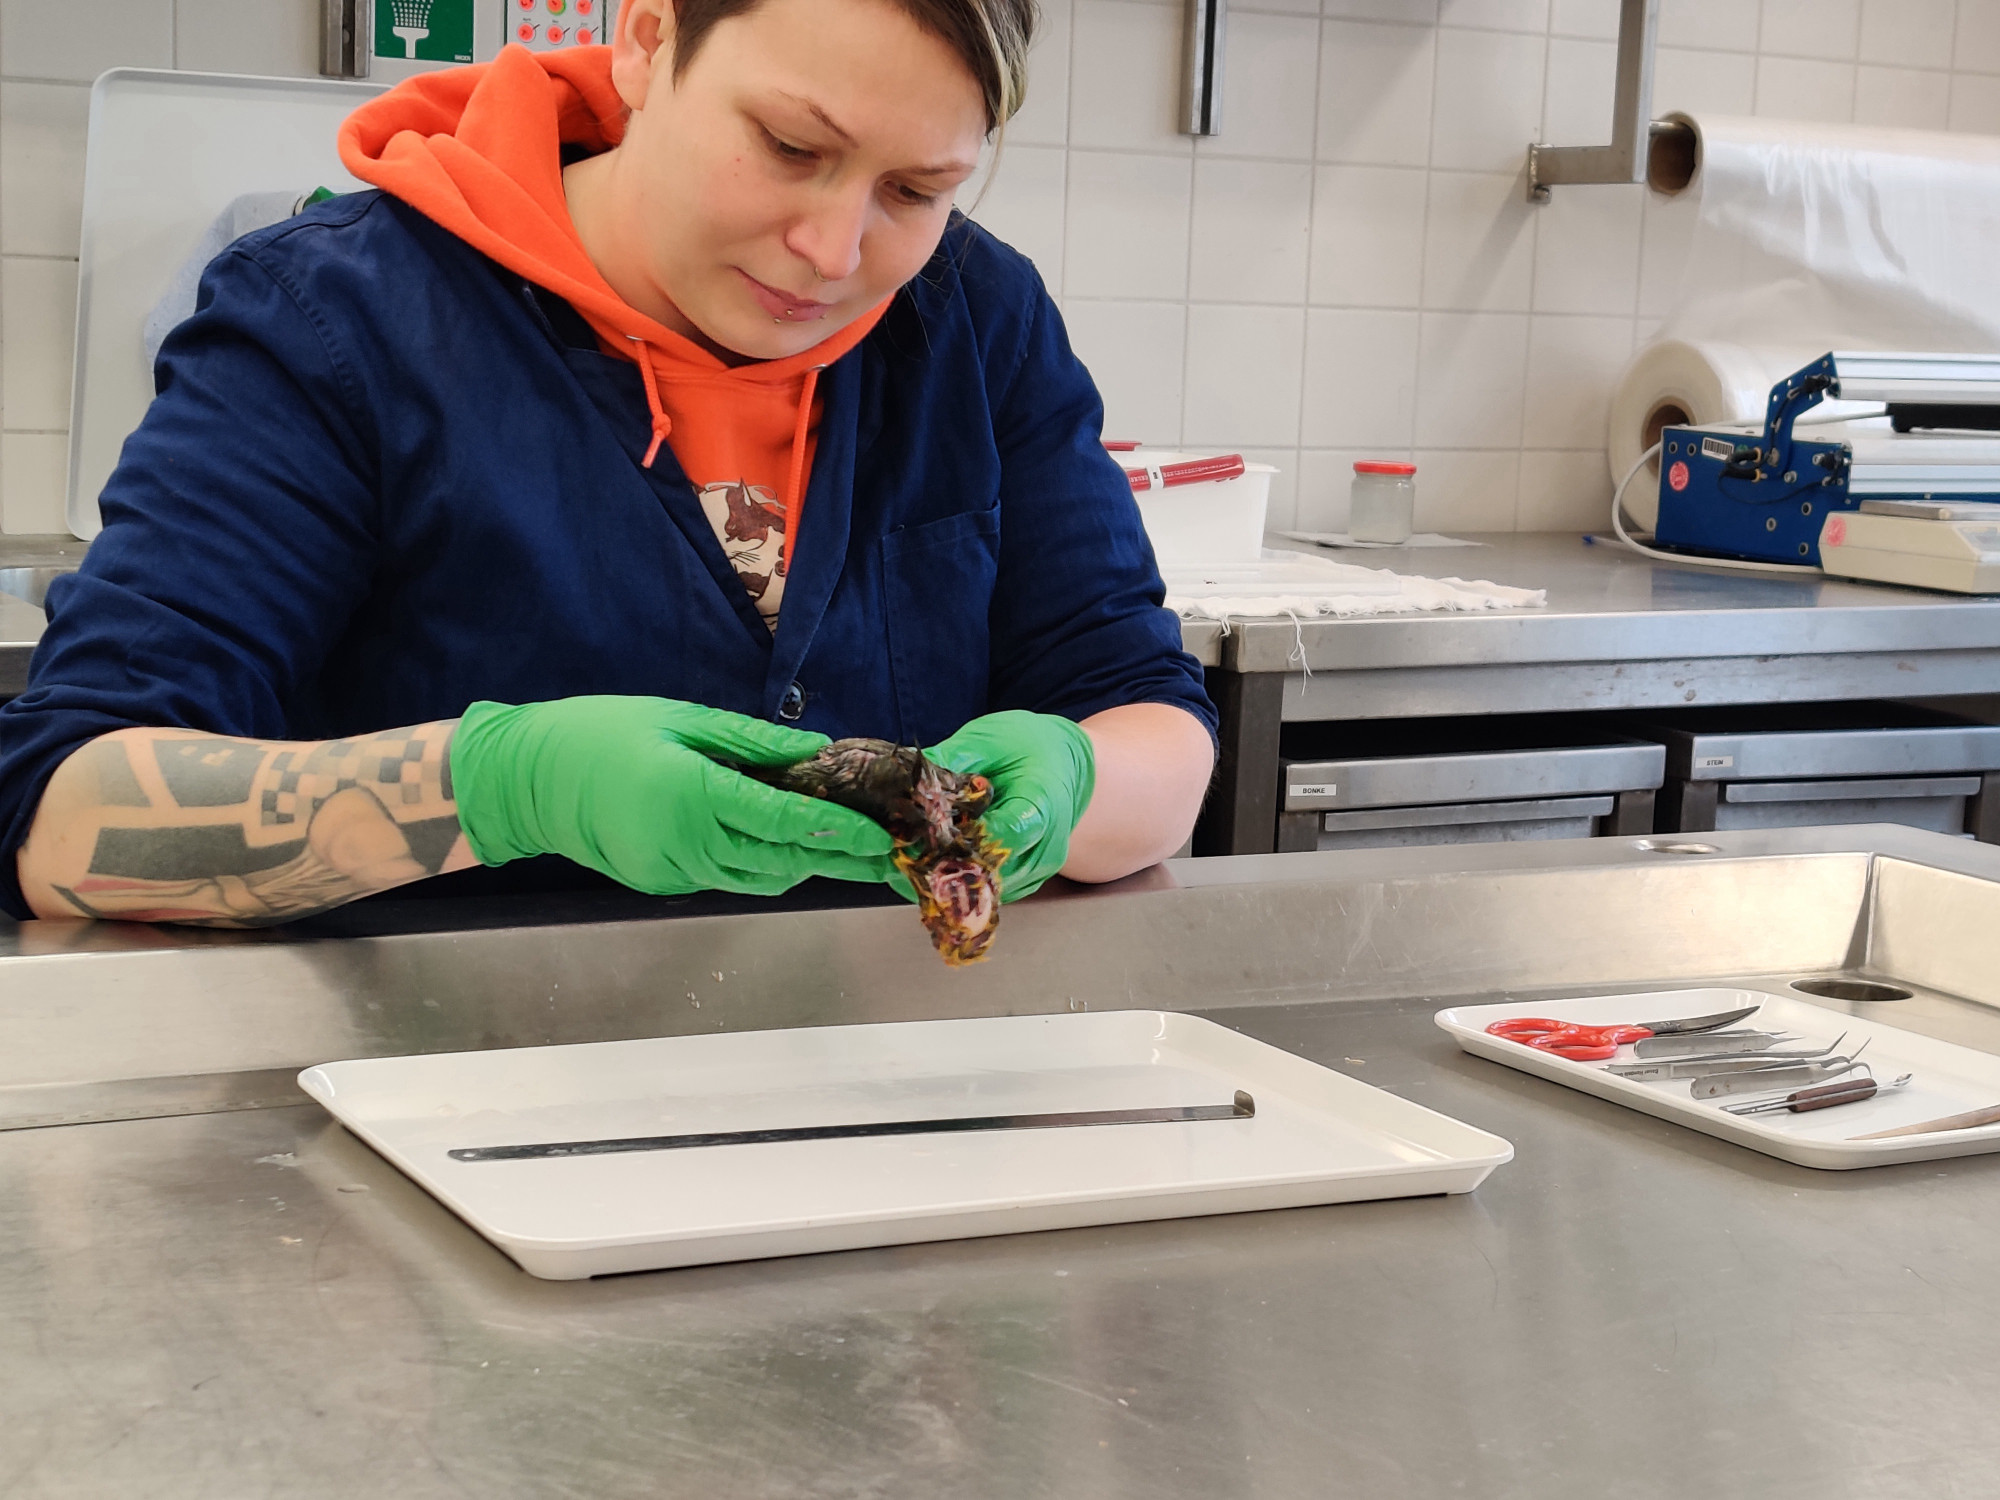 Photo of a woman wearing green gloves bent over a metal table, observing an object (a dead bird carcass) that she holds in her hands. There is a white tray on the table with a ruler placed on top of it. On a white tray beside it, there is a pair of scissors and other preparation tools. In the background, there is a tiled wall and a metal sideboard, on top of which are various work utensils.